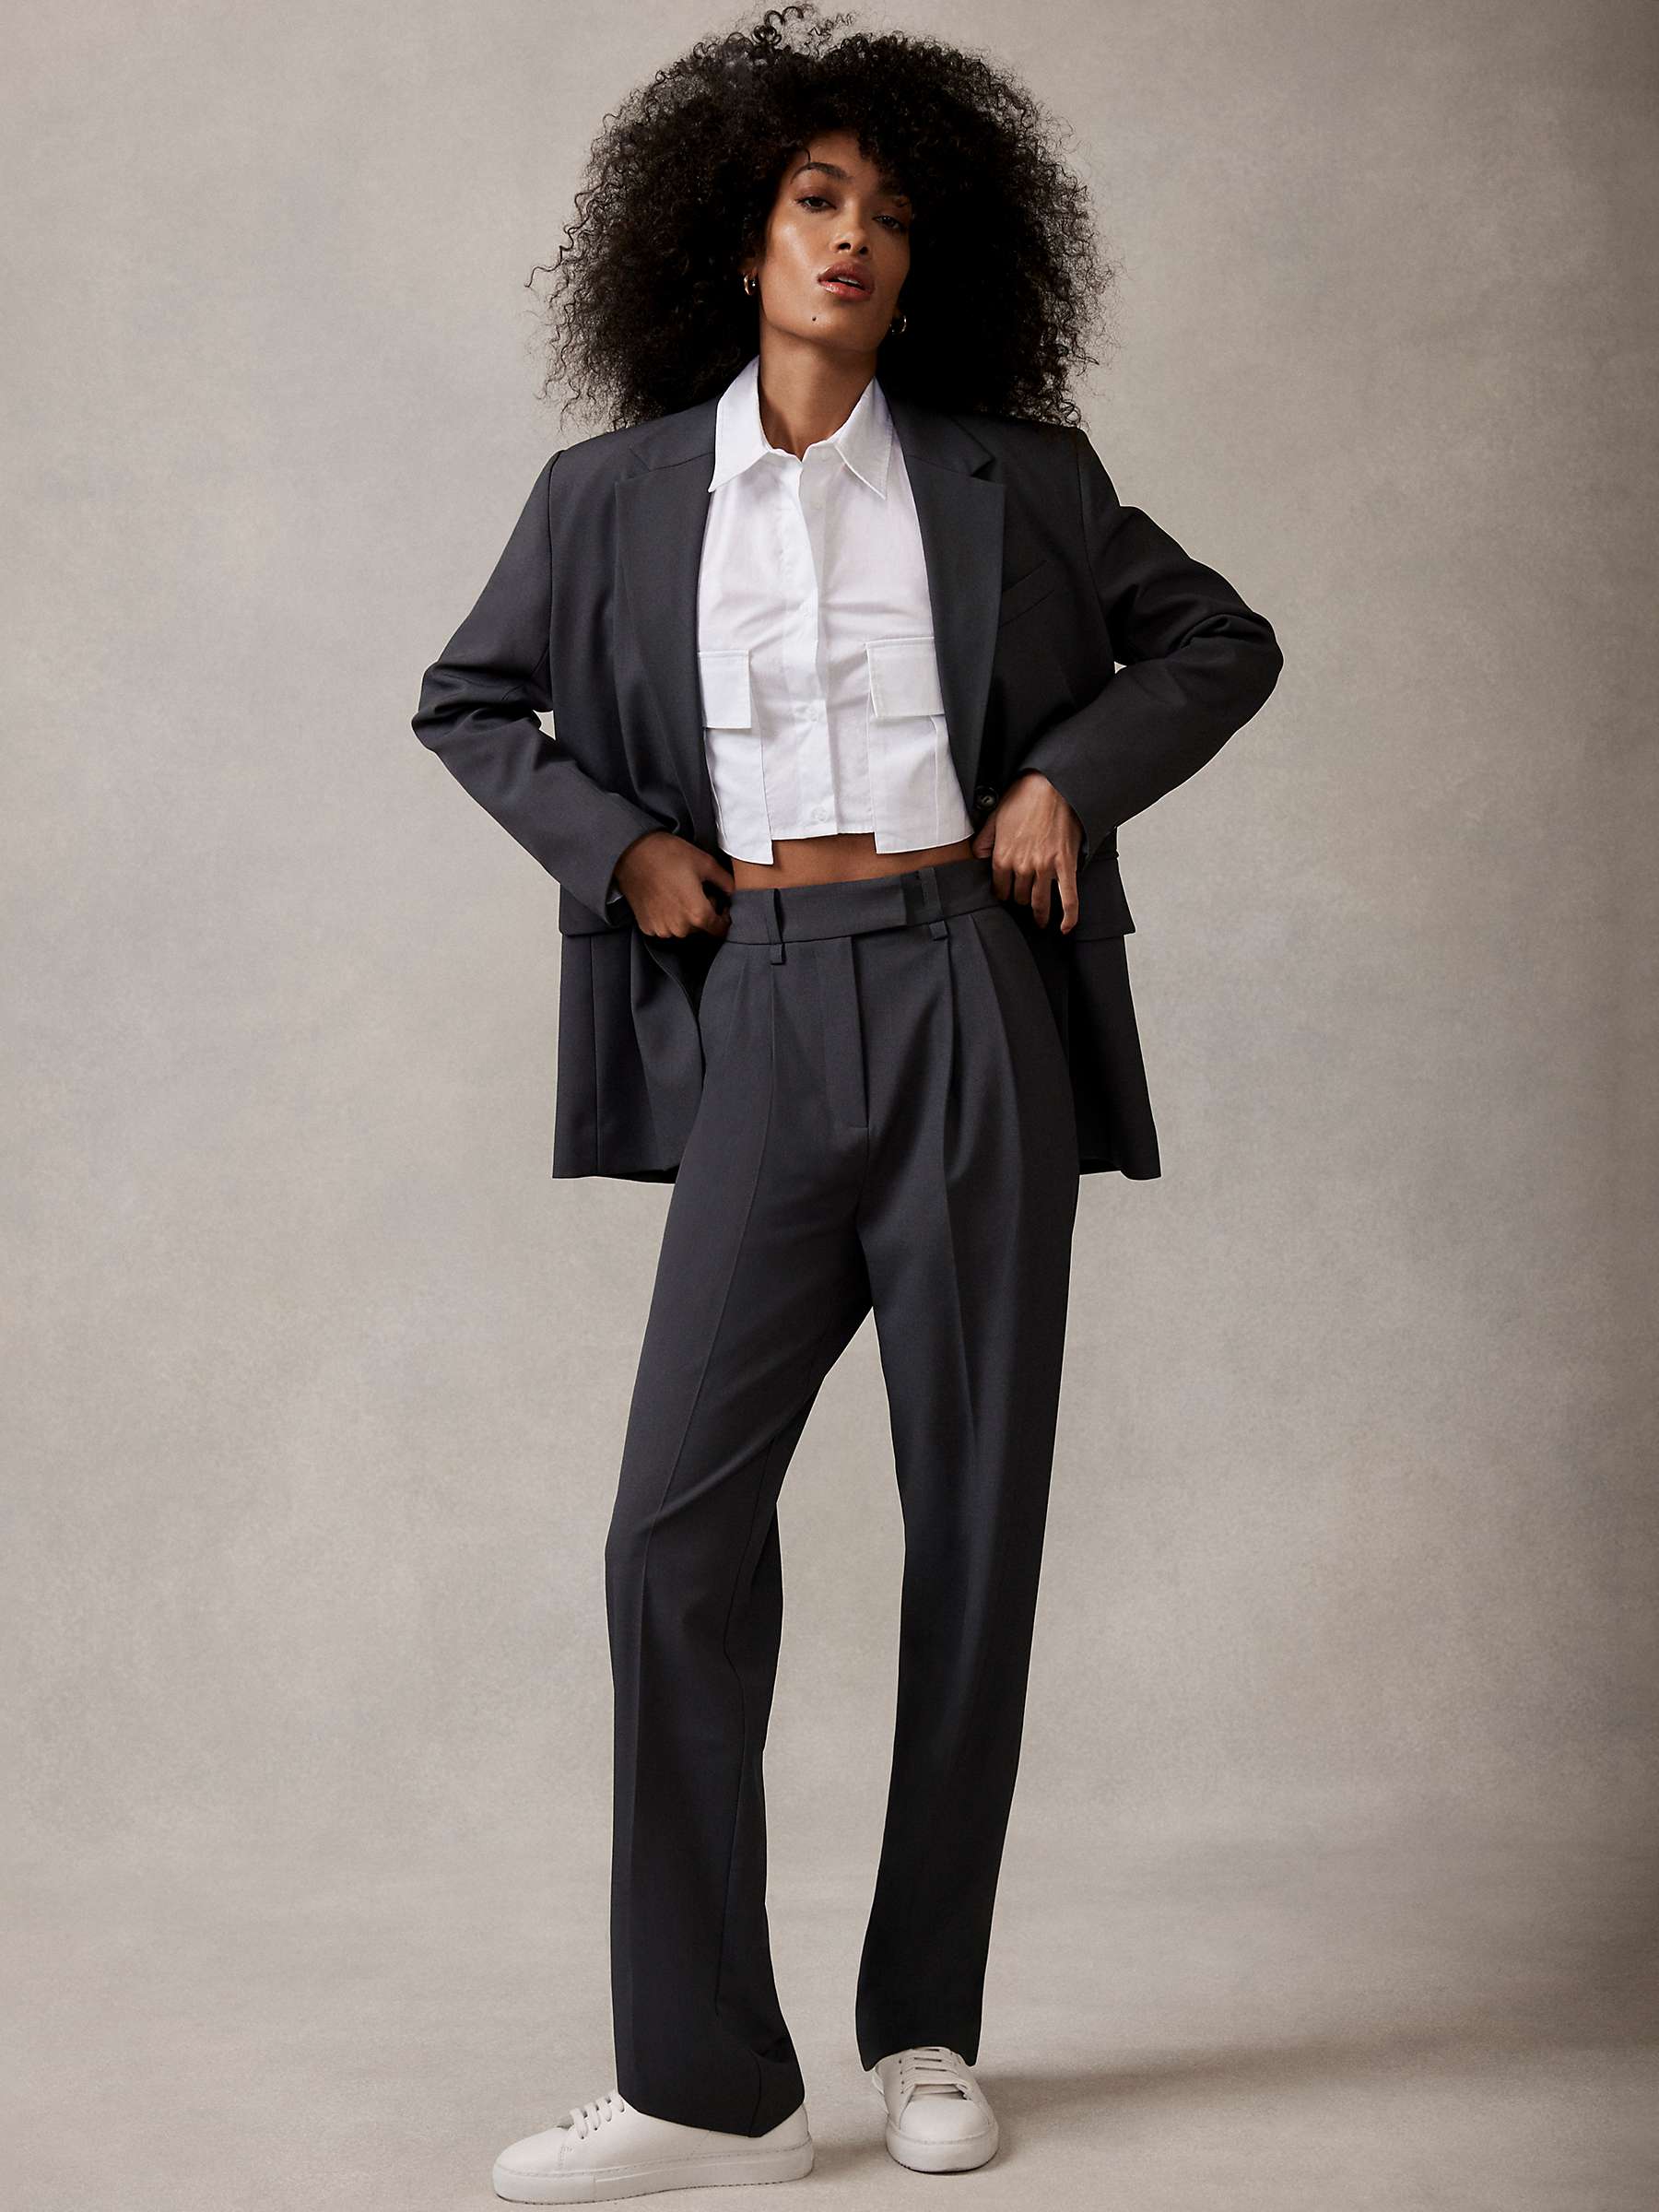 Buy Mint Velvet Pleat Front Tailored Trousers, Charcoal Grey Online at johnlewis.com